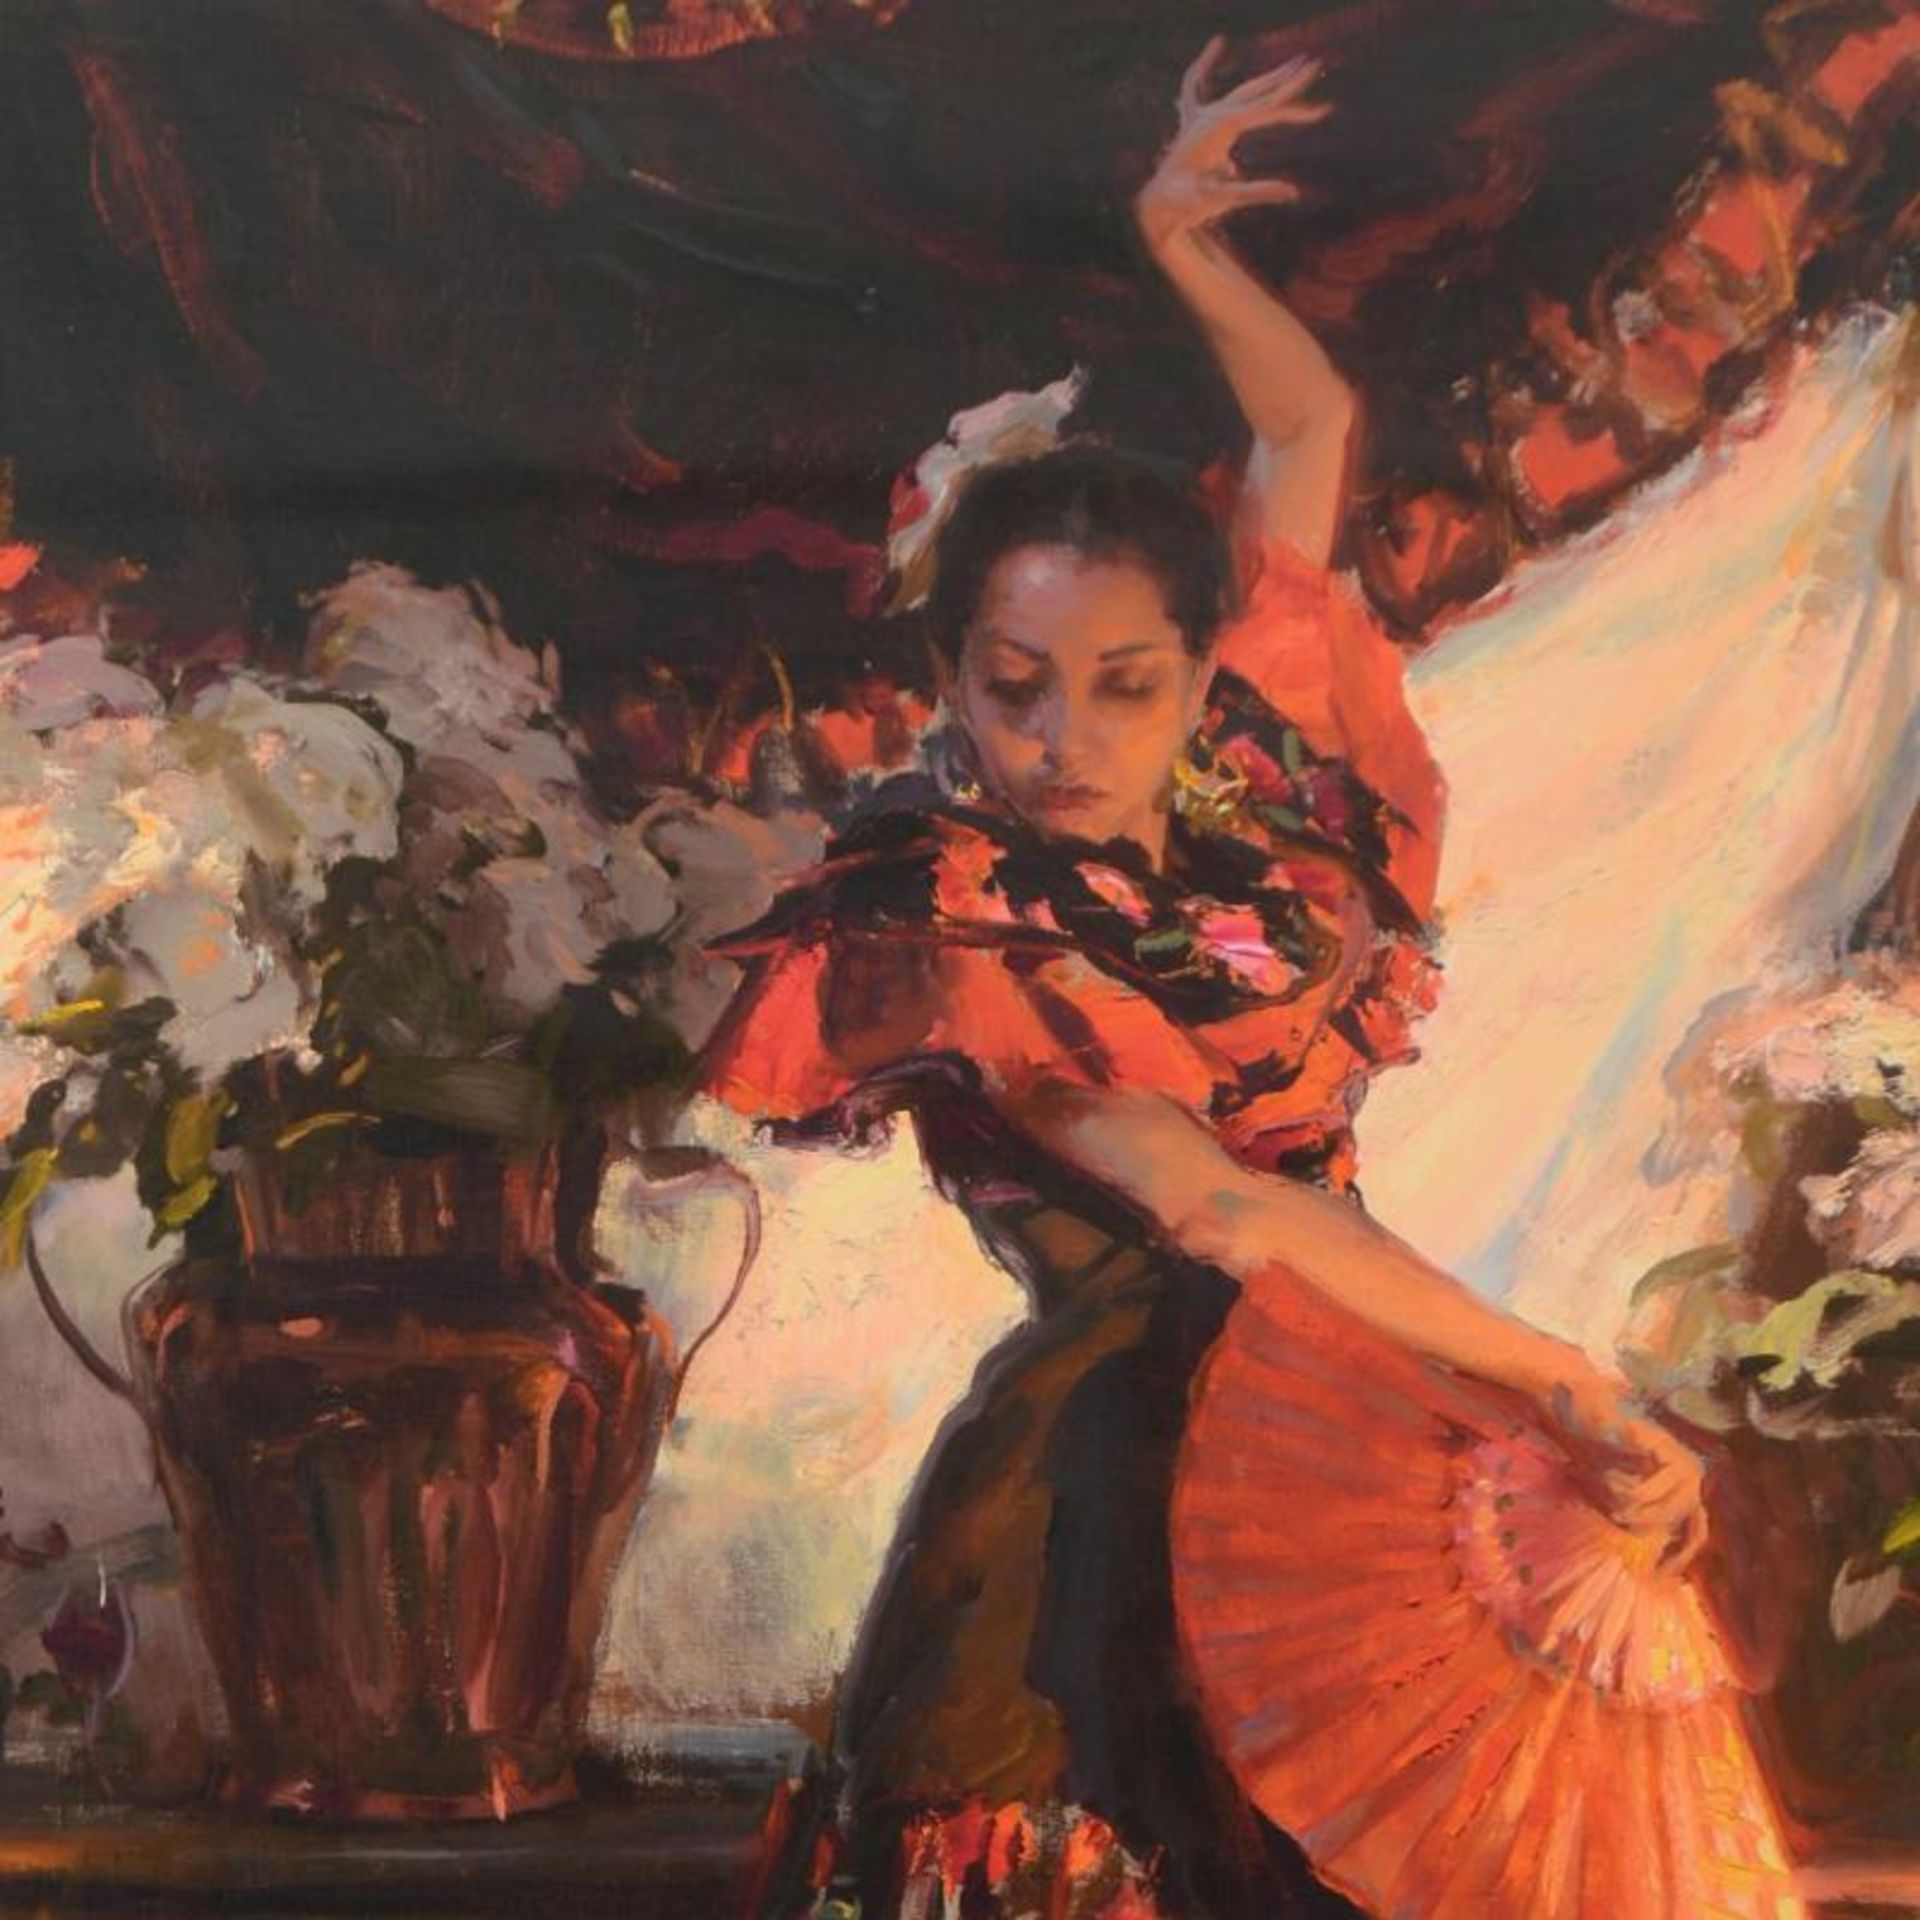 Dan Gerhartz, "Viva Flamenco" Limited Edition on Canvas, Numbered and Hand Signe - Image 2 of 2